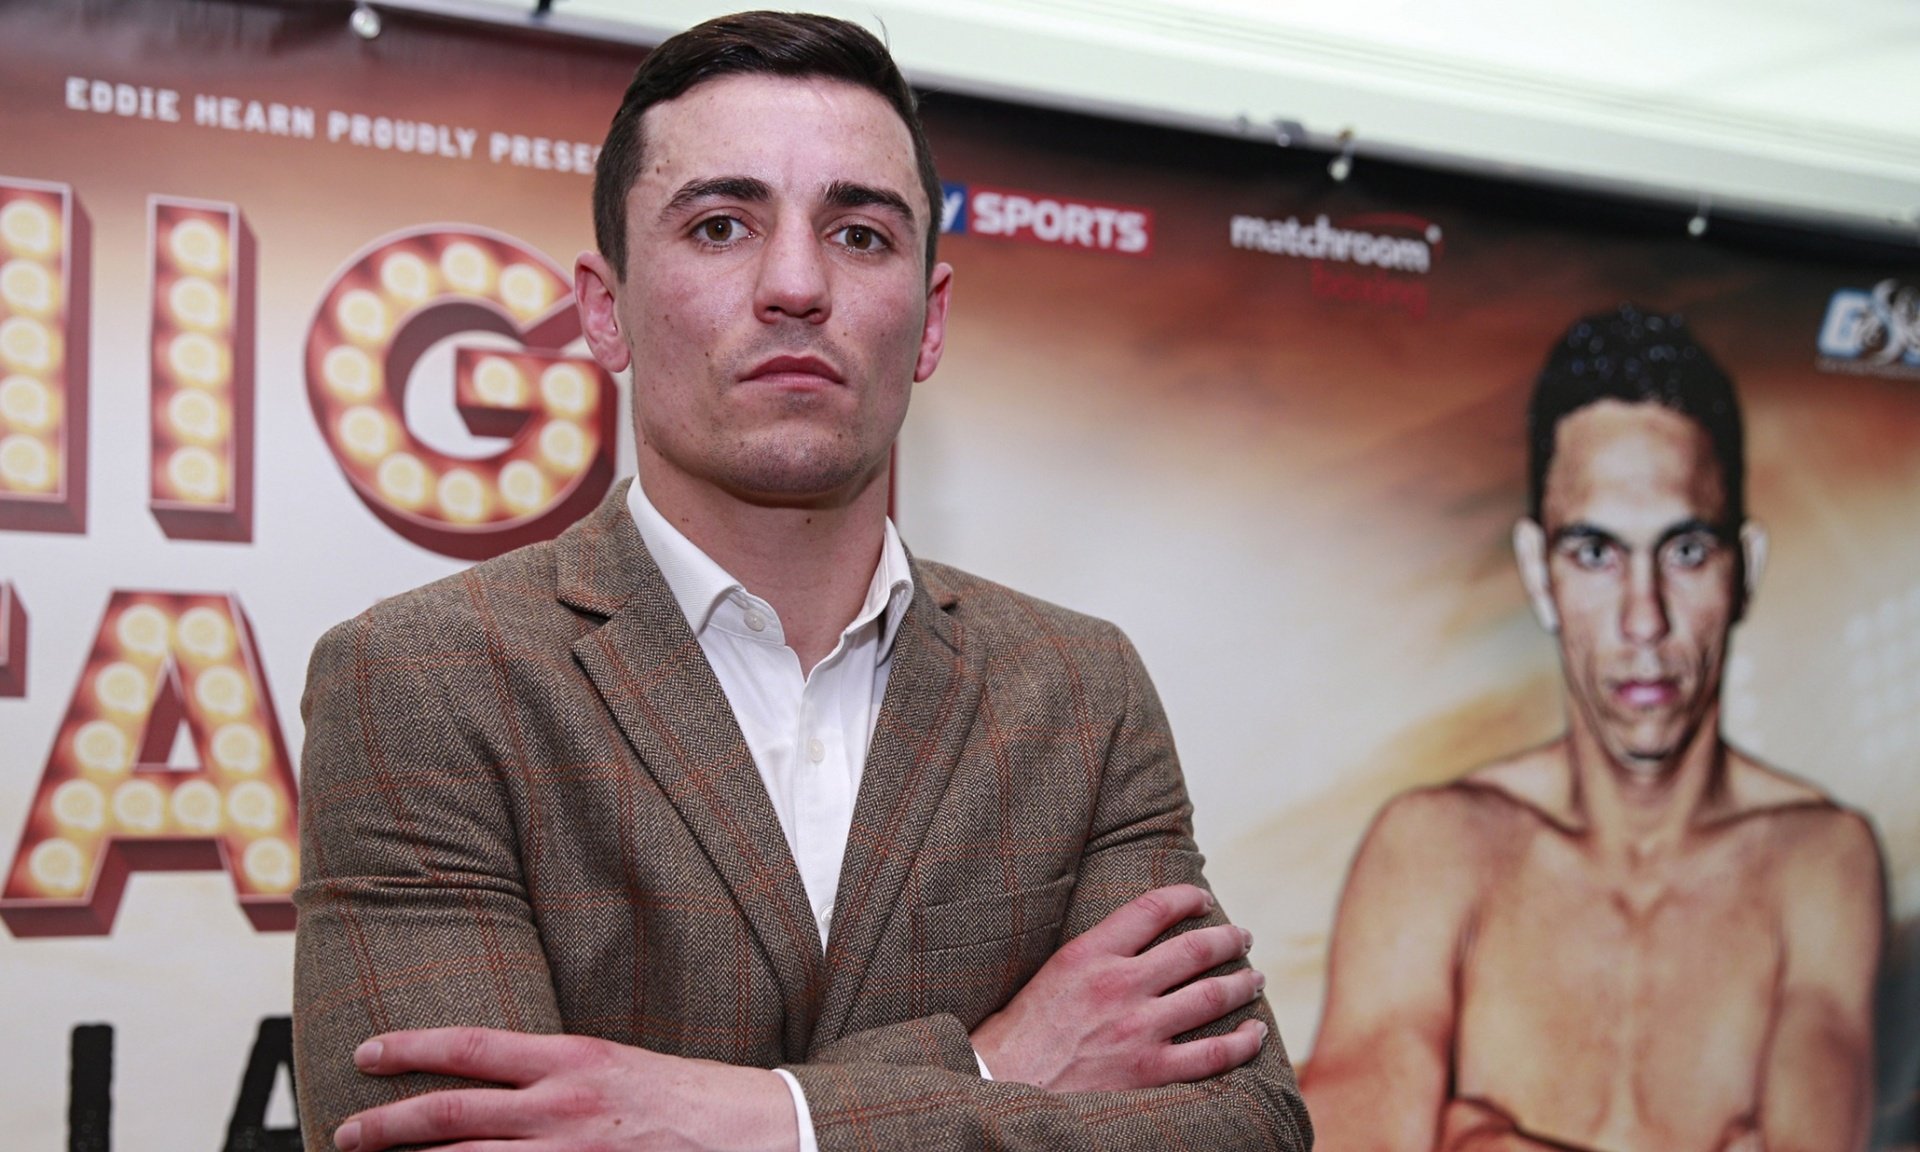 Anthony Crolla lined up for world title shot after recovering from attack 